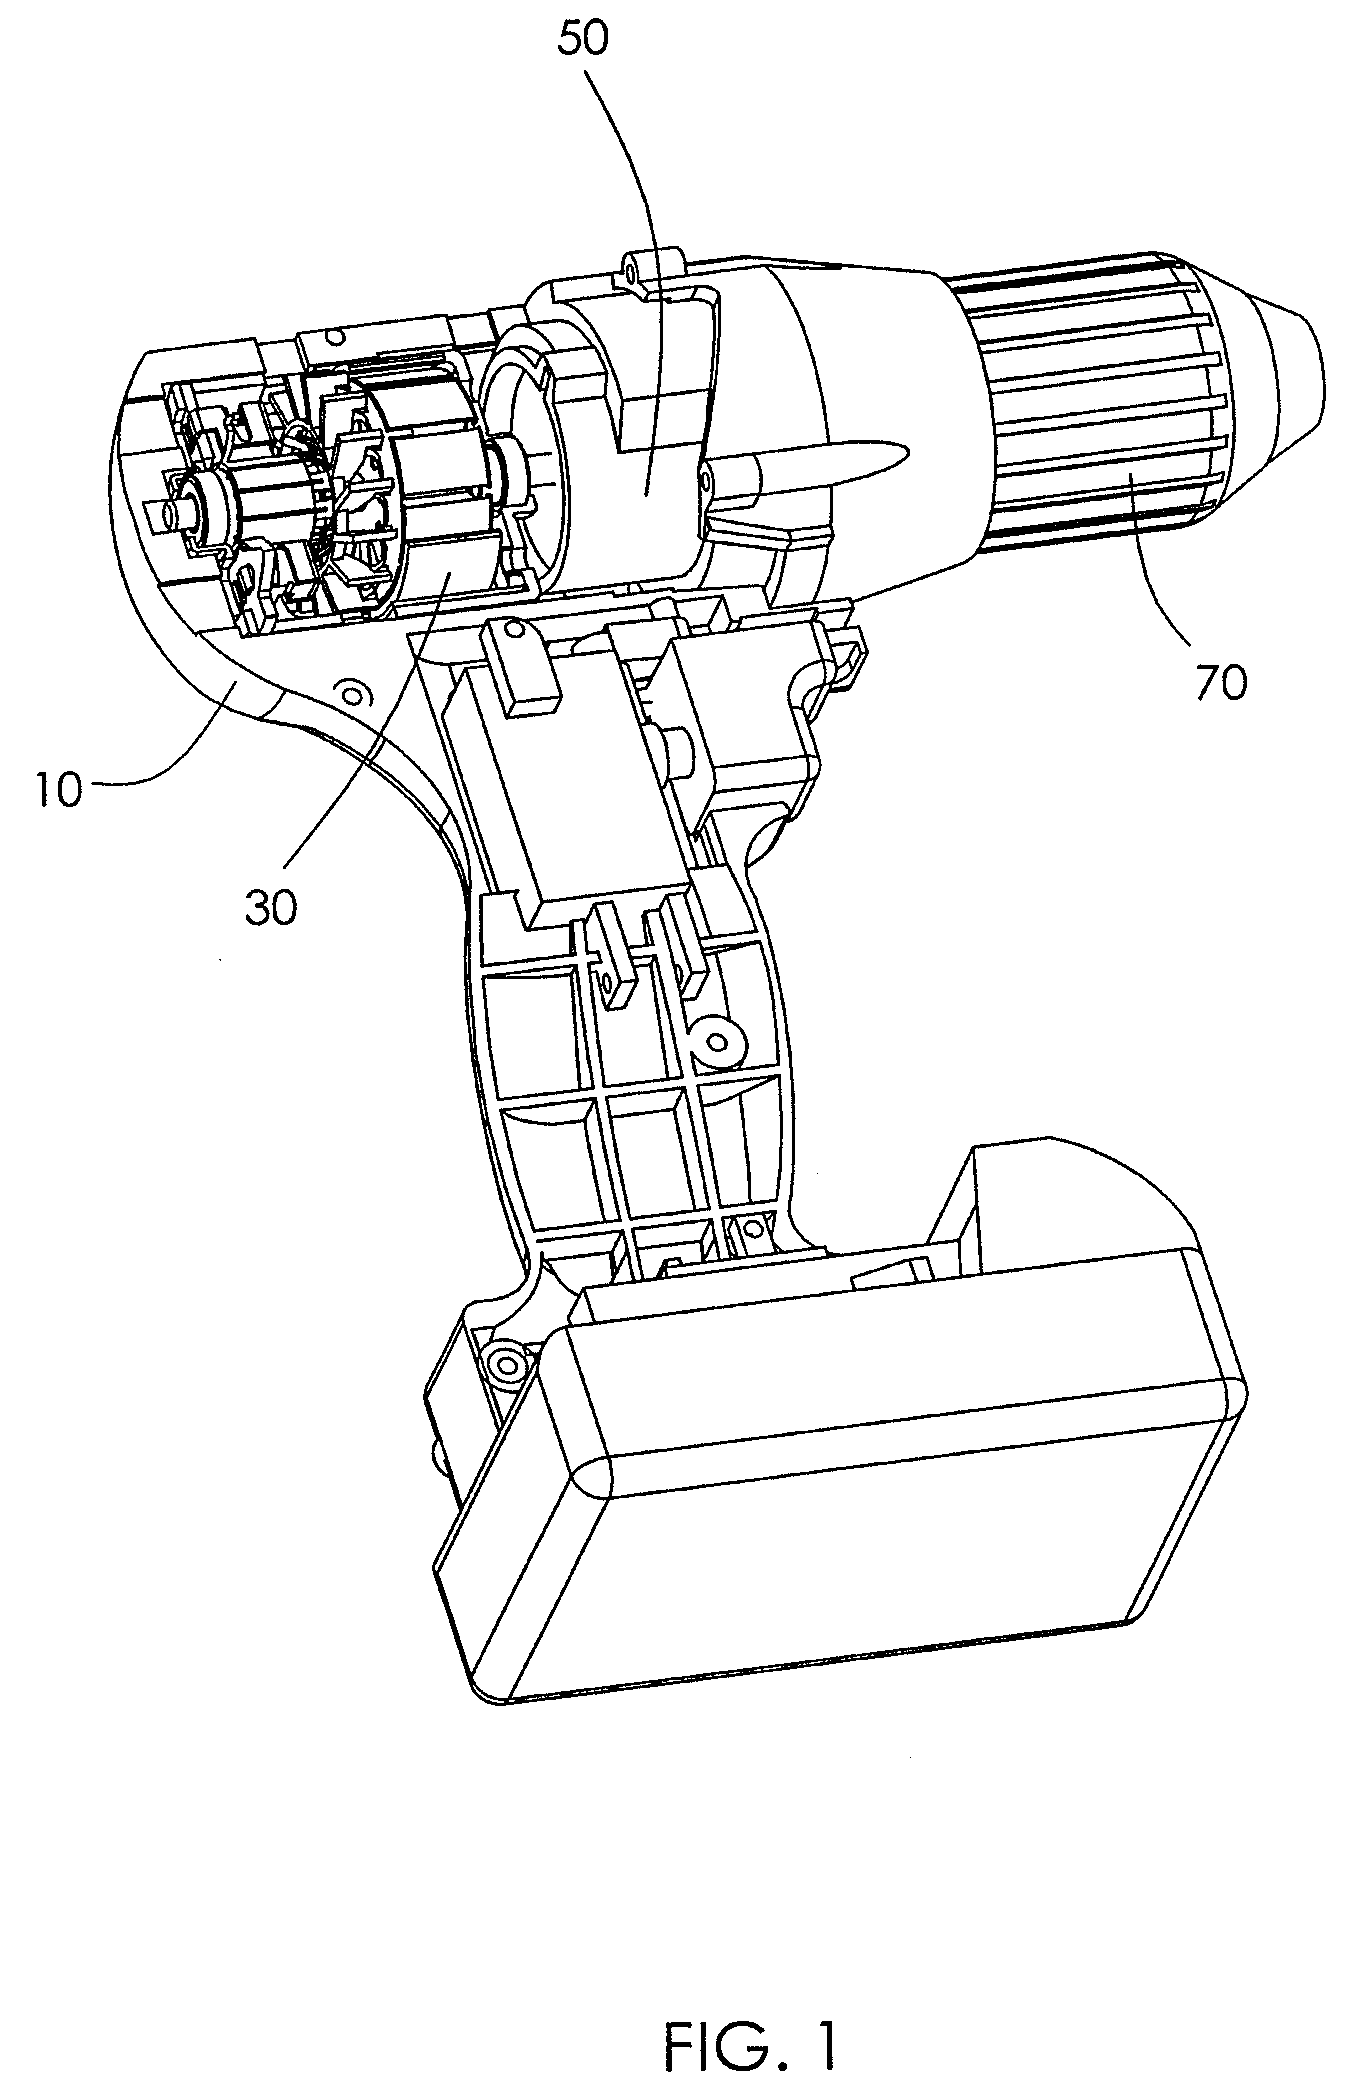 Power tool with a DC brush motor and with a second power source